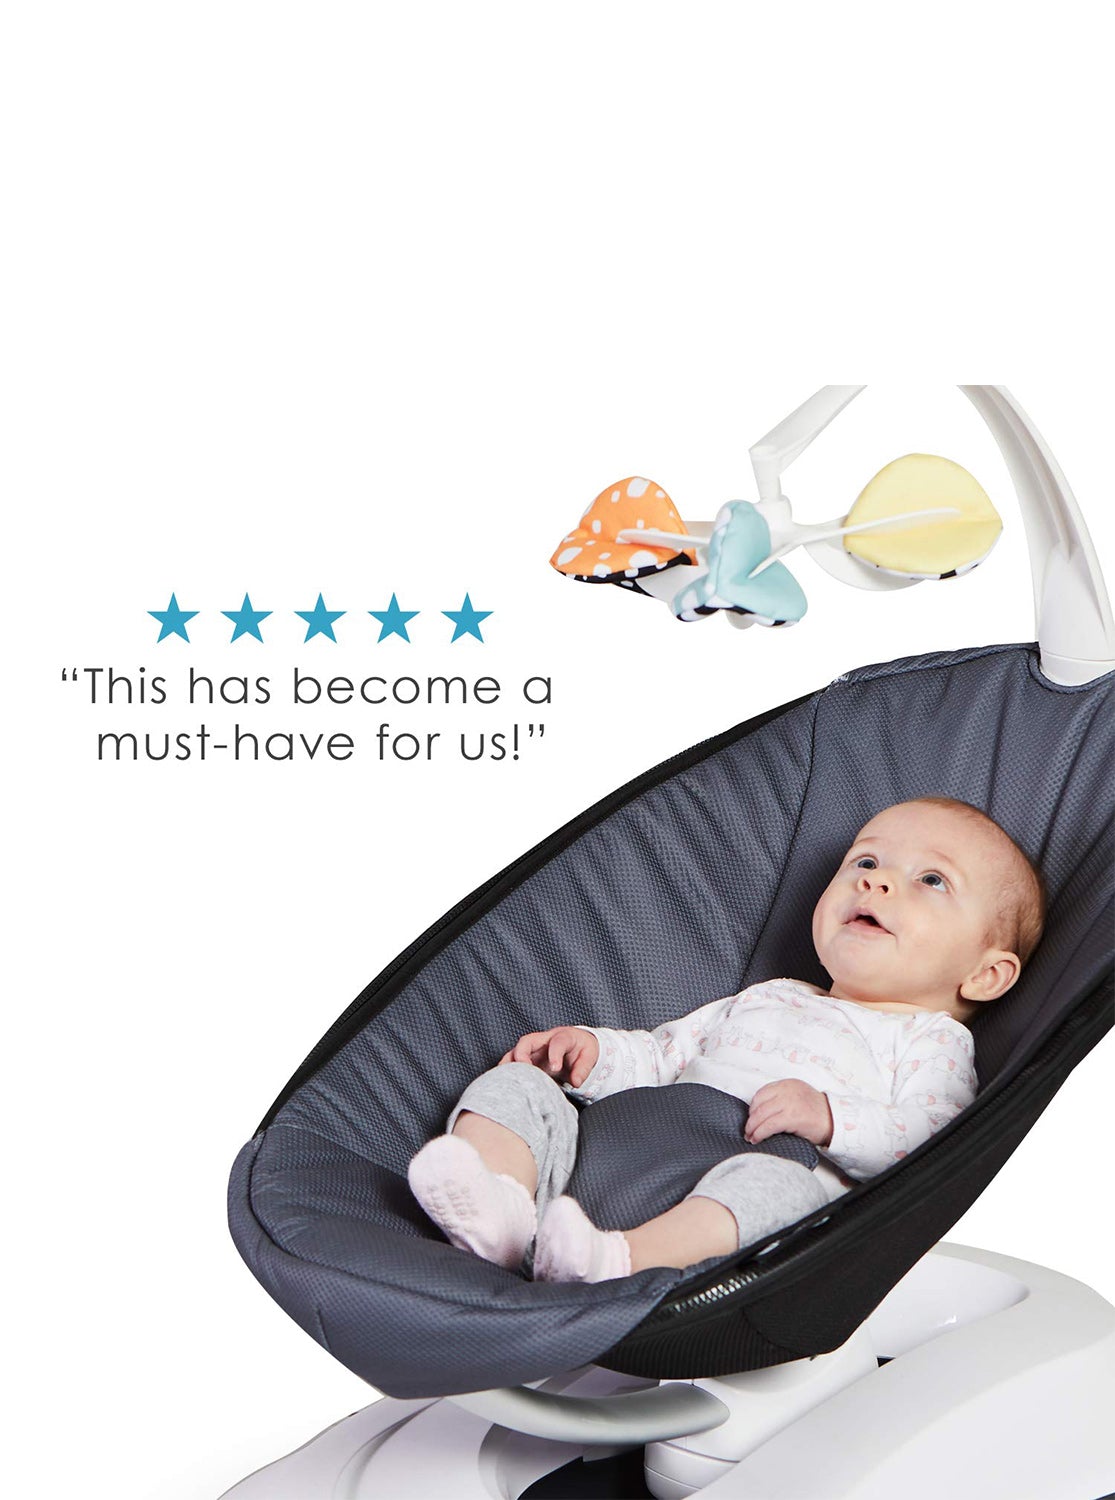 4moms rockaRoo Baby Swing, Compact Baby Rocker with Front to Back Gliding Motion, Cool Mesh Fabric - ANB Baby -$100 - $300